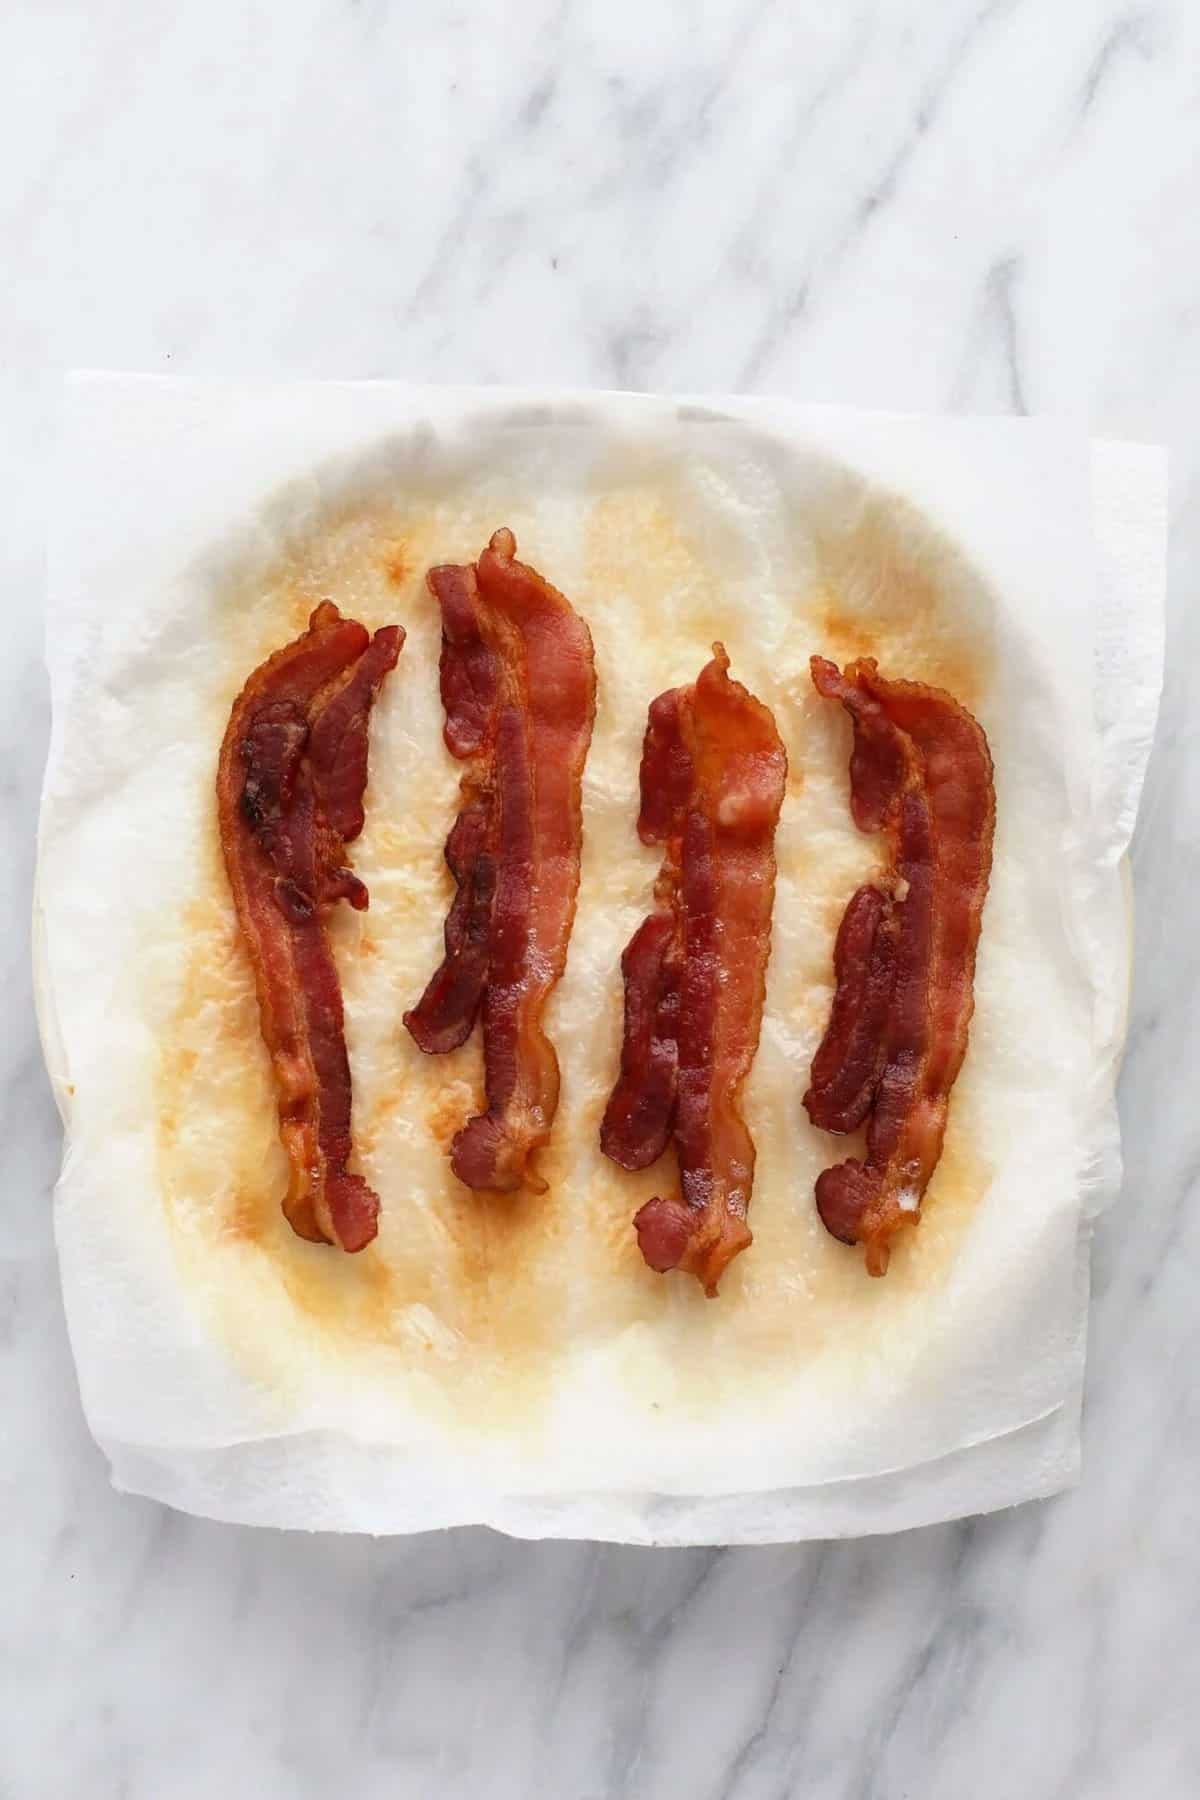 How to Cook Bacon in the Oven, Stove, and Microwave - The Manual